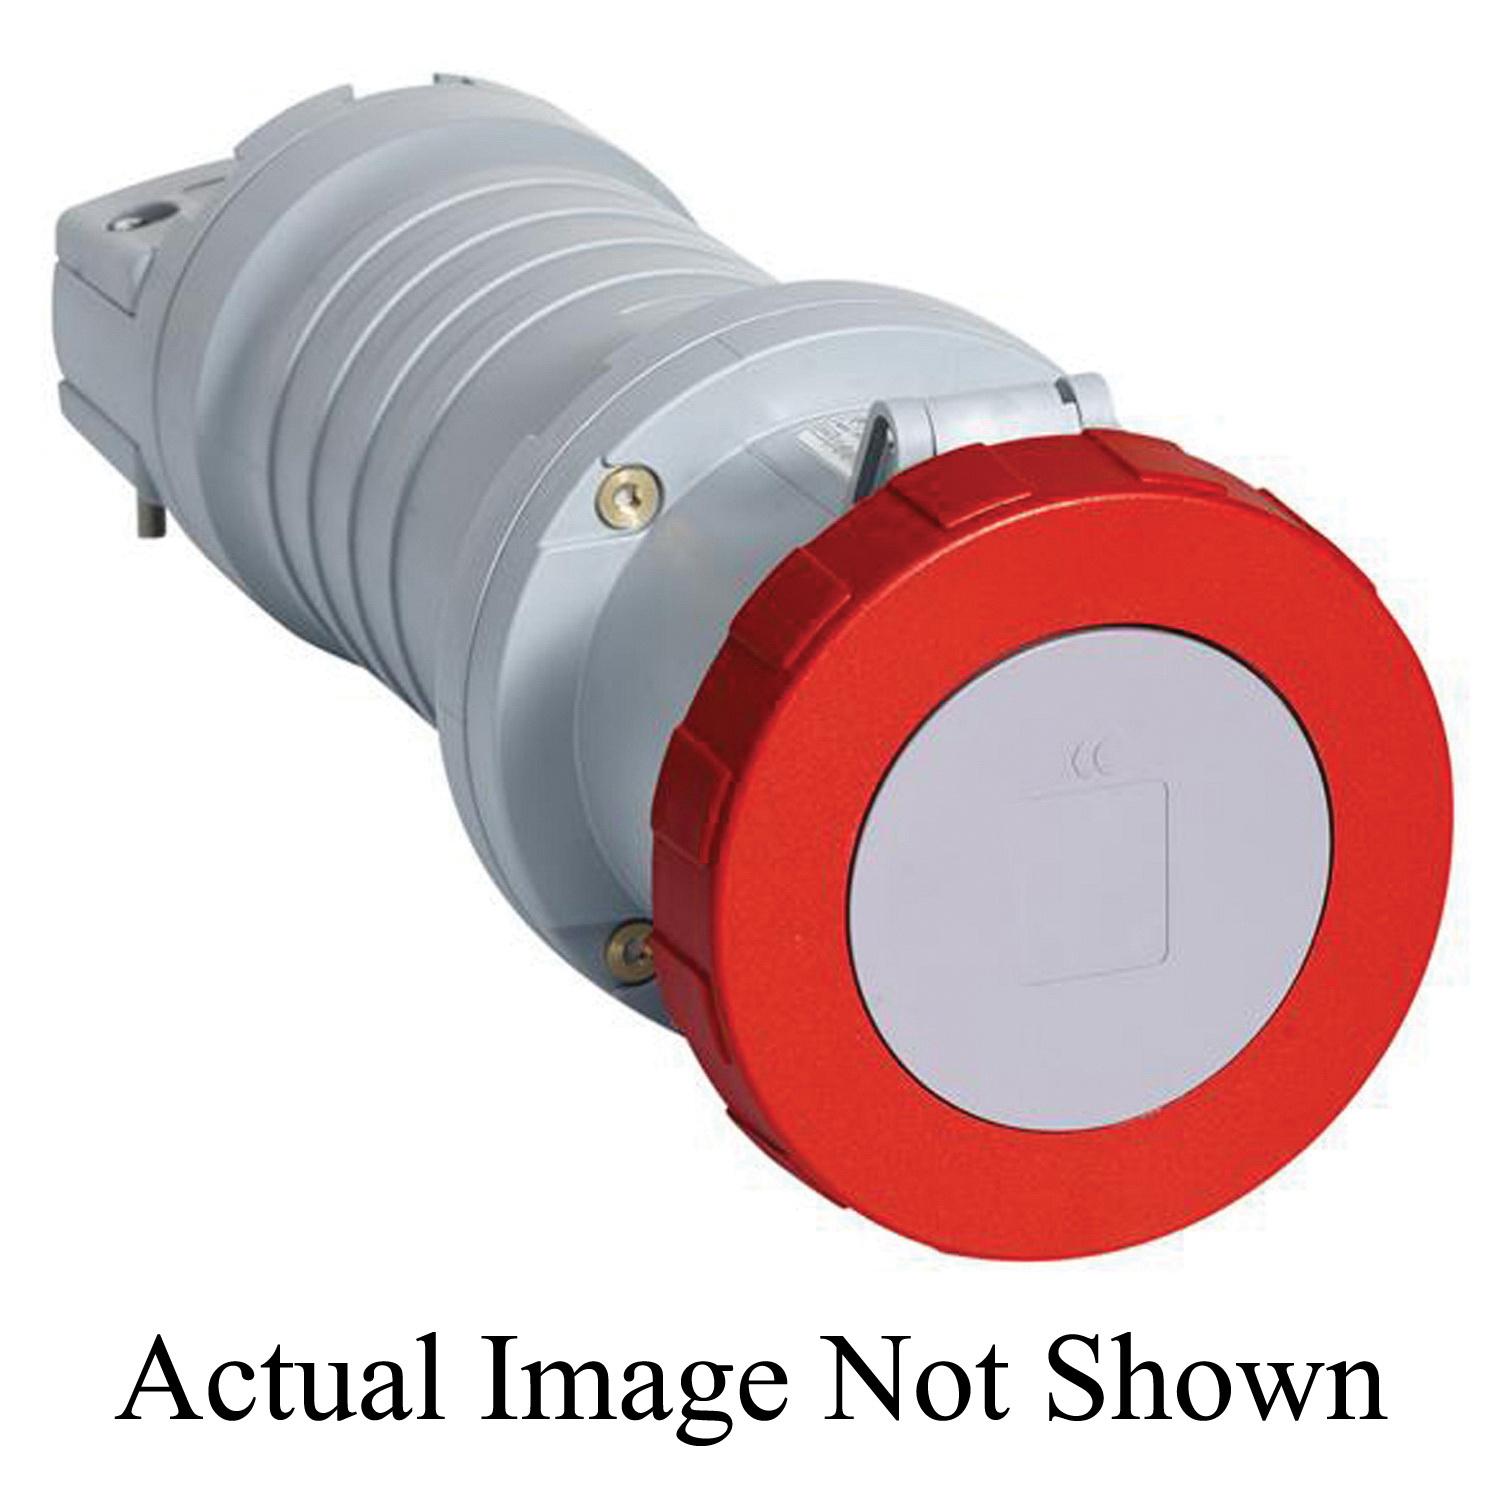 ABB ABB5100C9W Pin and Sleeve Connector